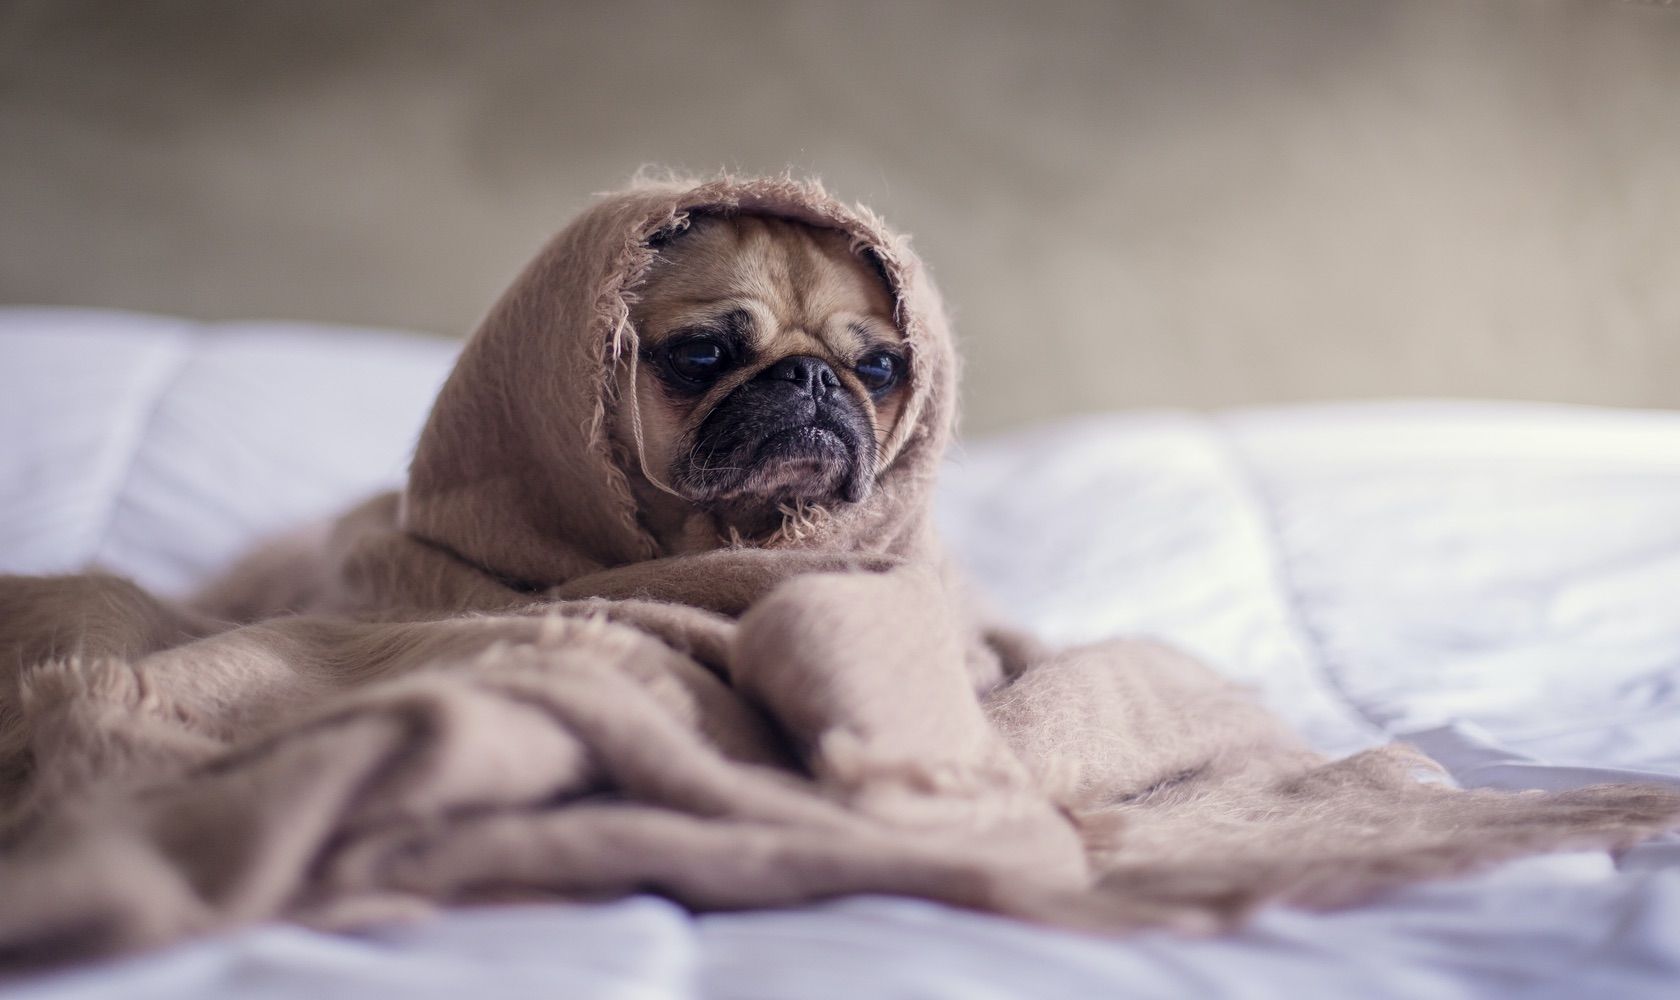 pug dog sitting in bed wrapped in blanket